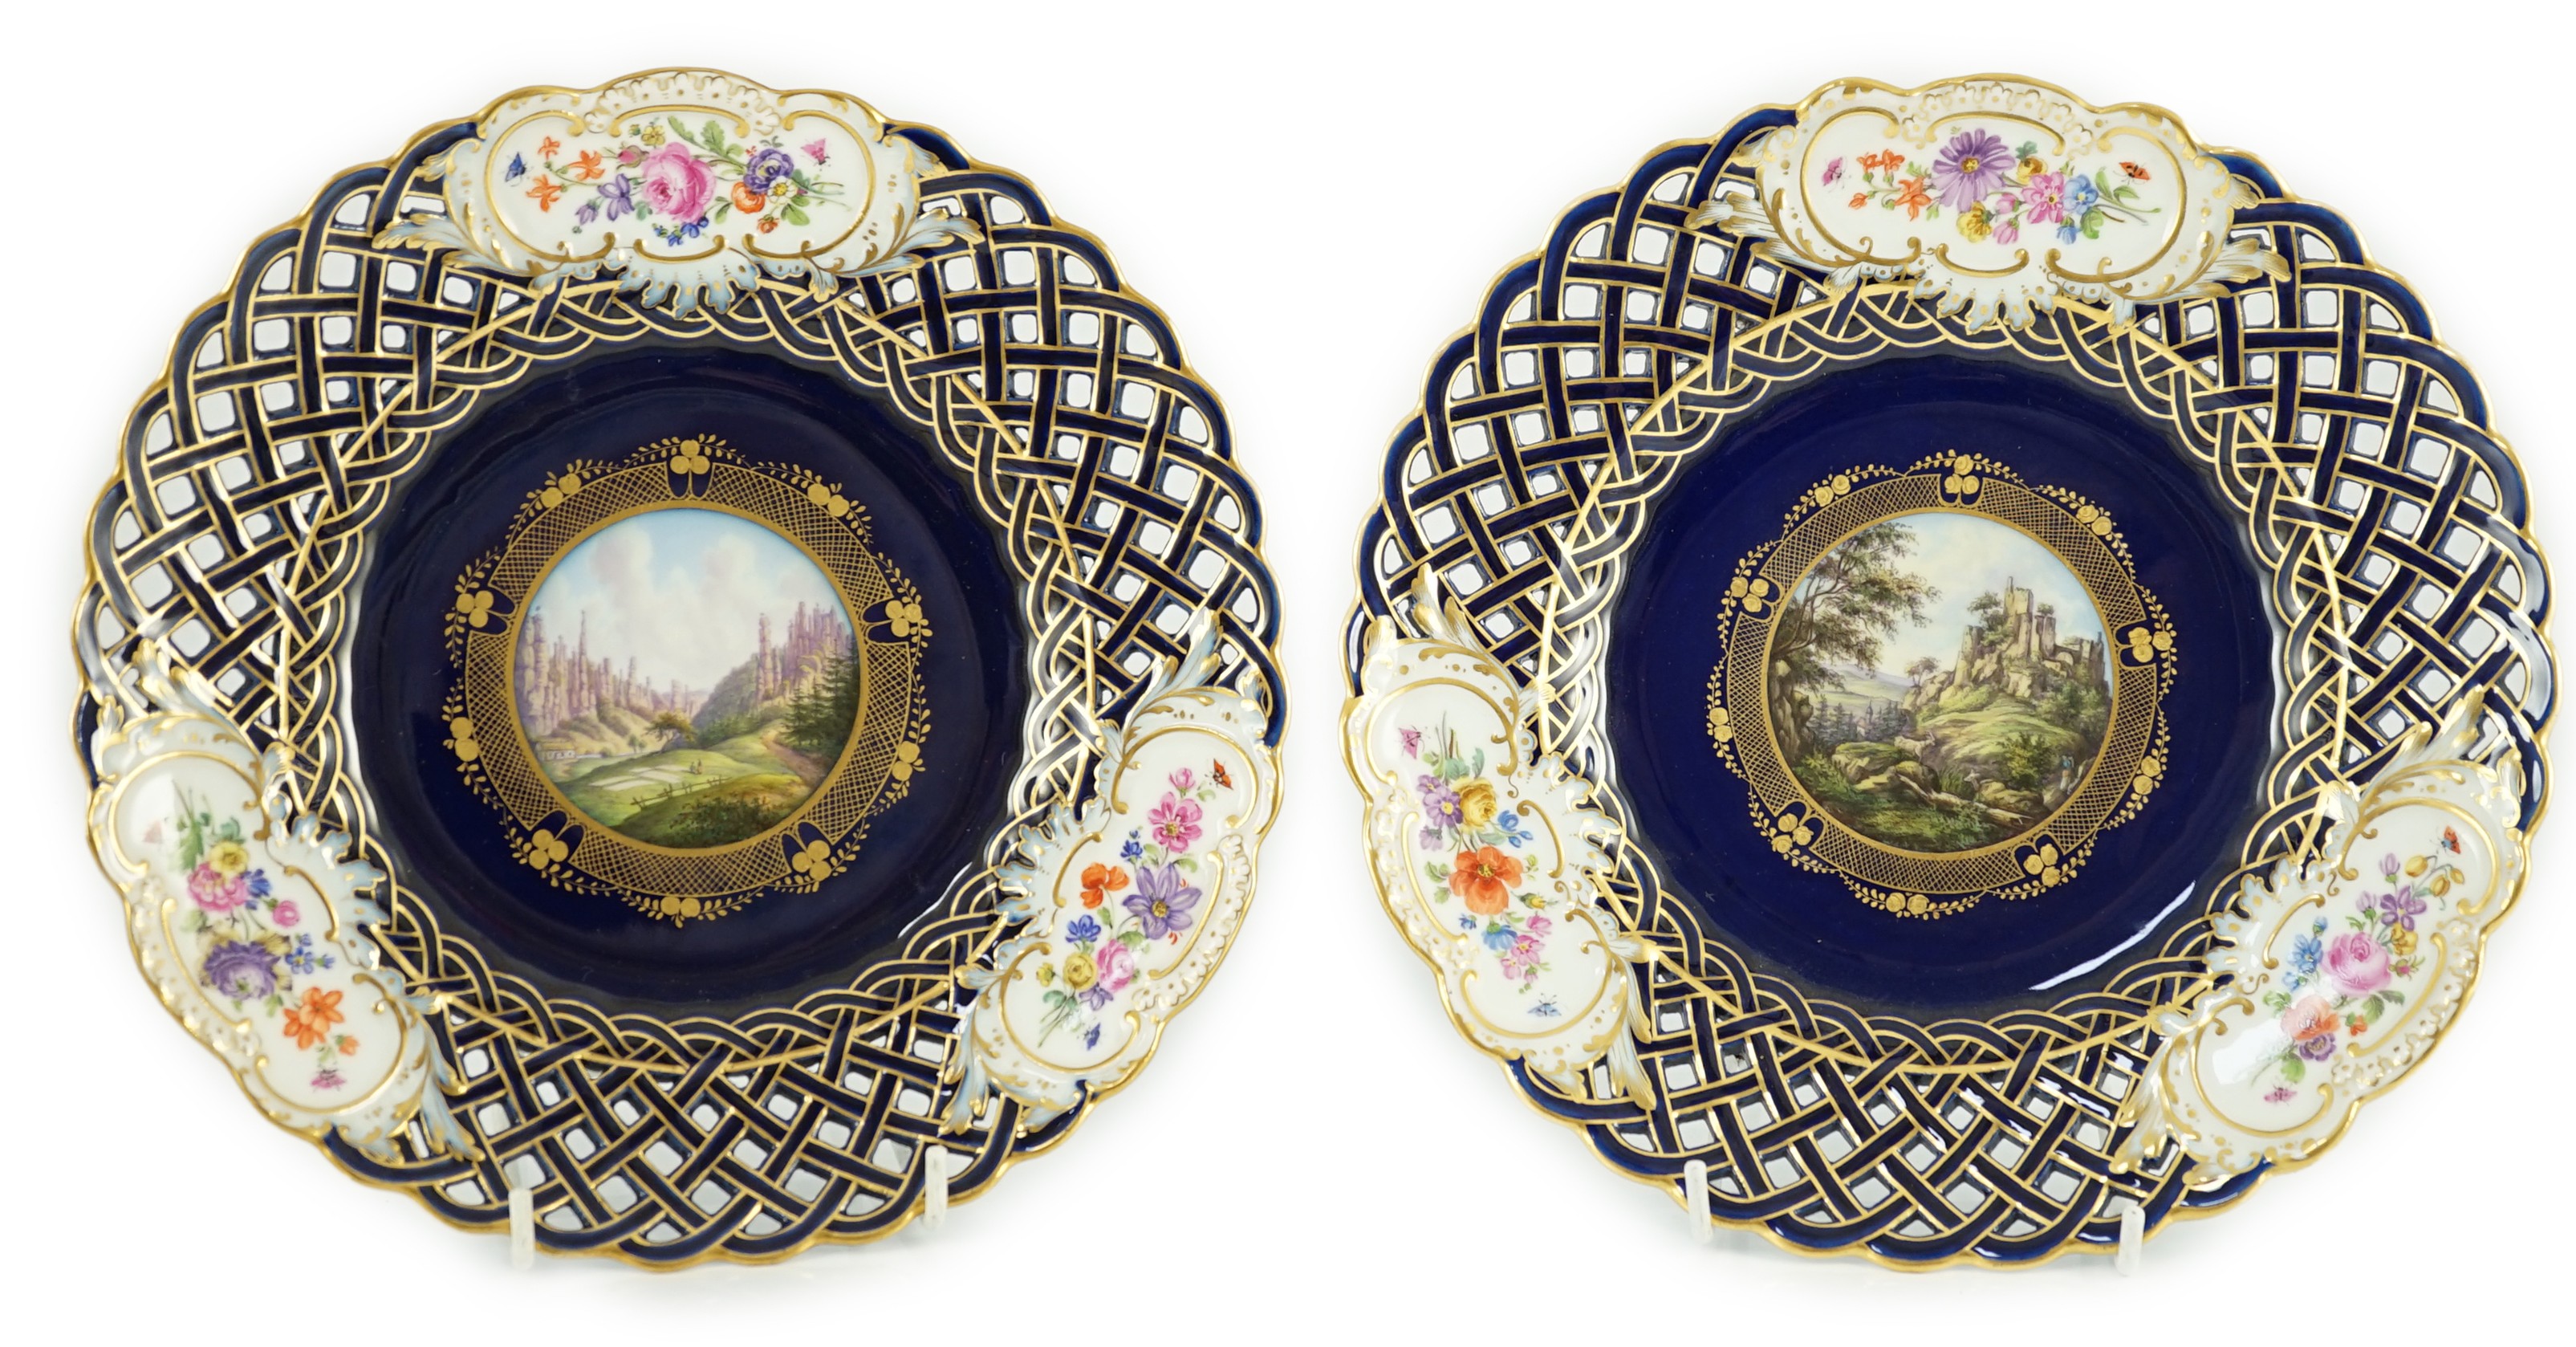 A pair of Meissen reticulated named view plates, 19th century, 23.7cm diameter                                                                                                                                              